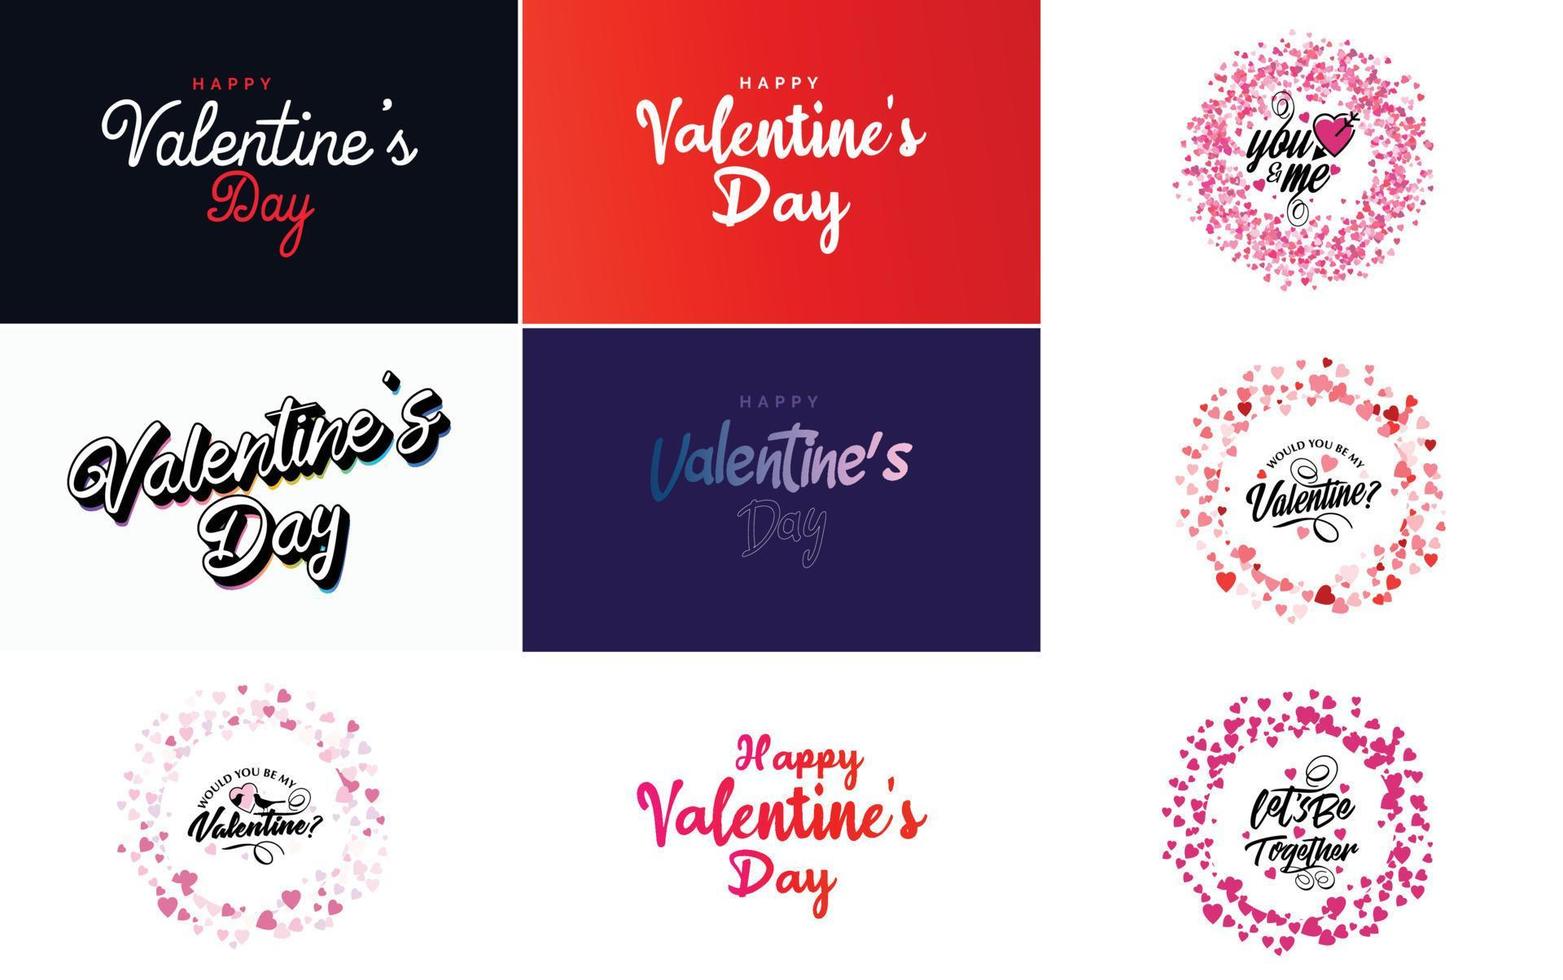 Vector illustration of a heart-shaped theme with Happy Valentine's Day text